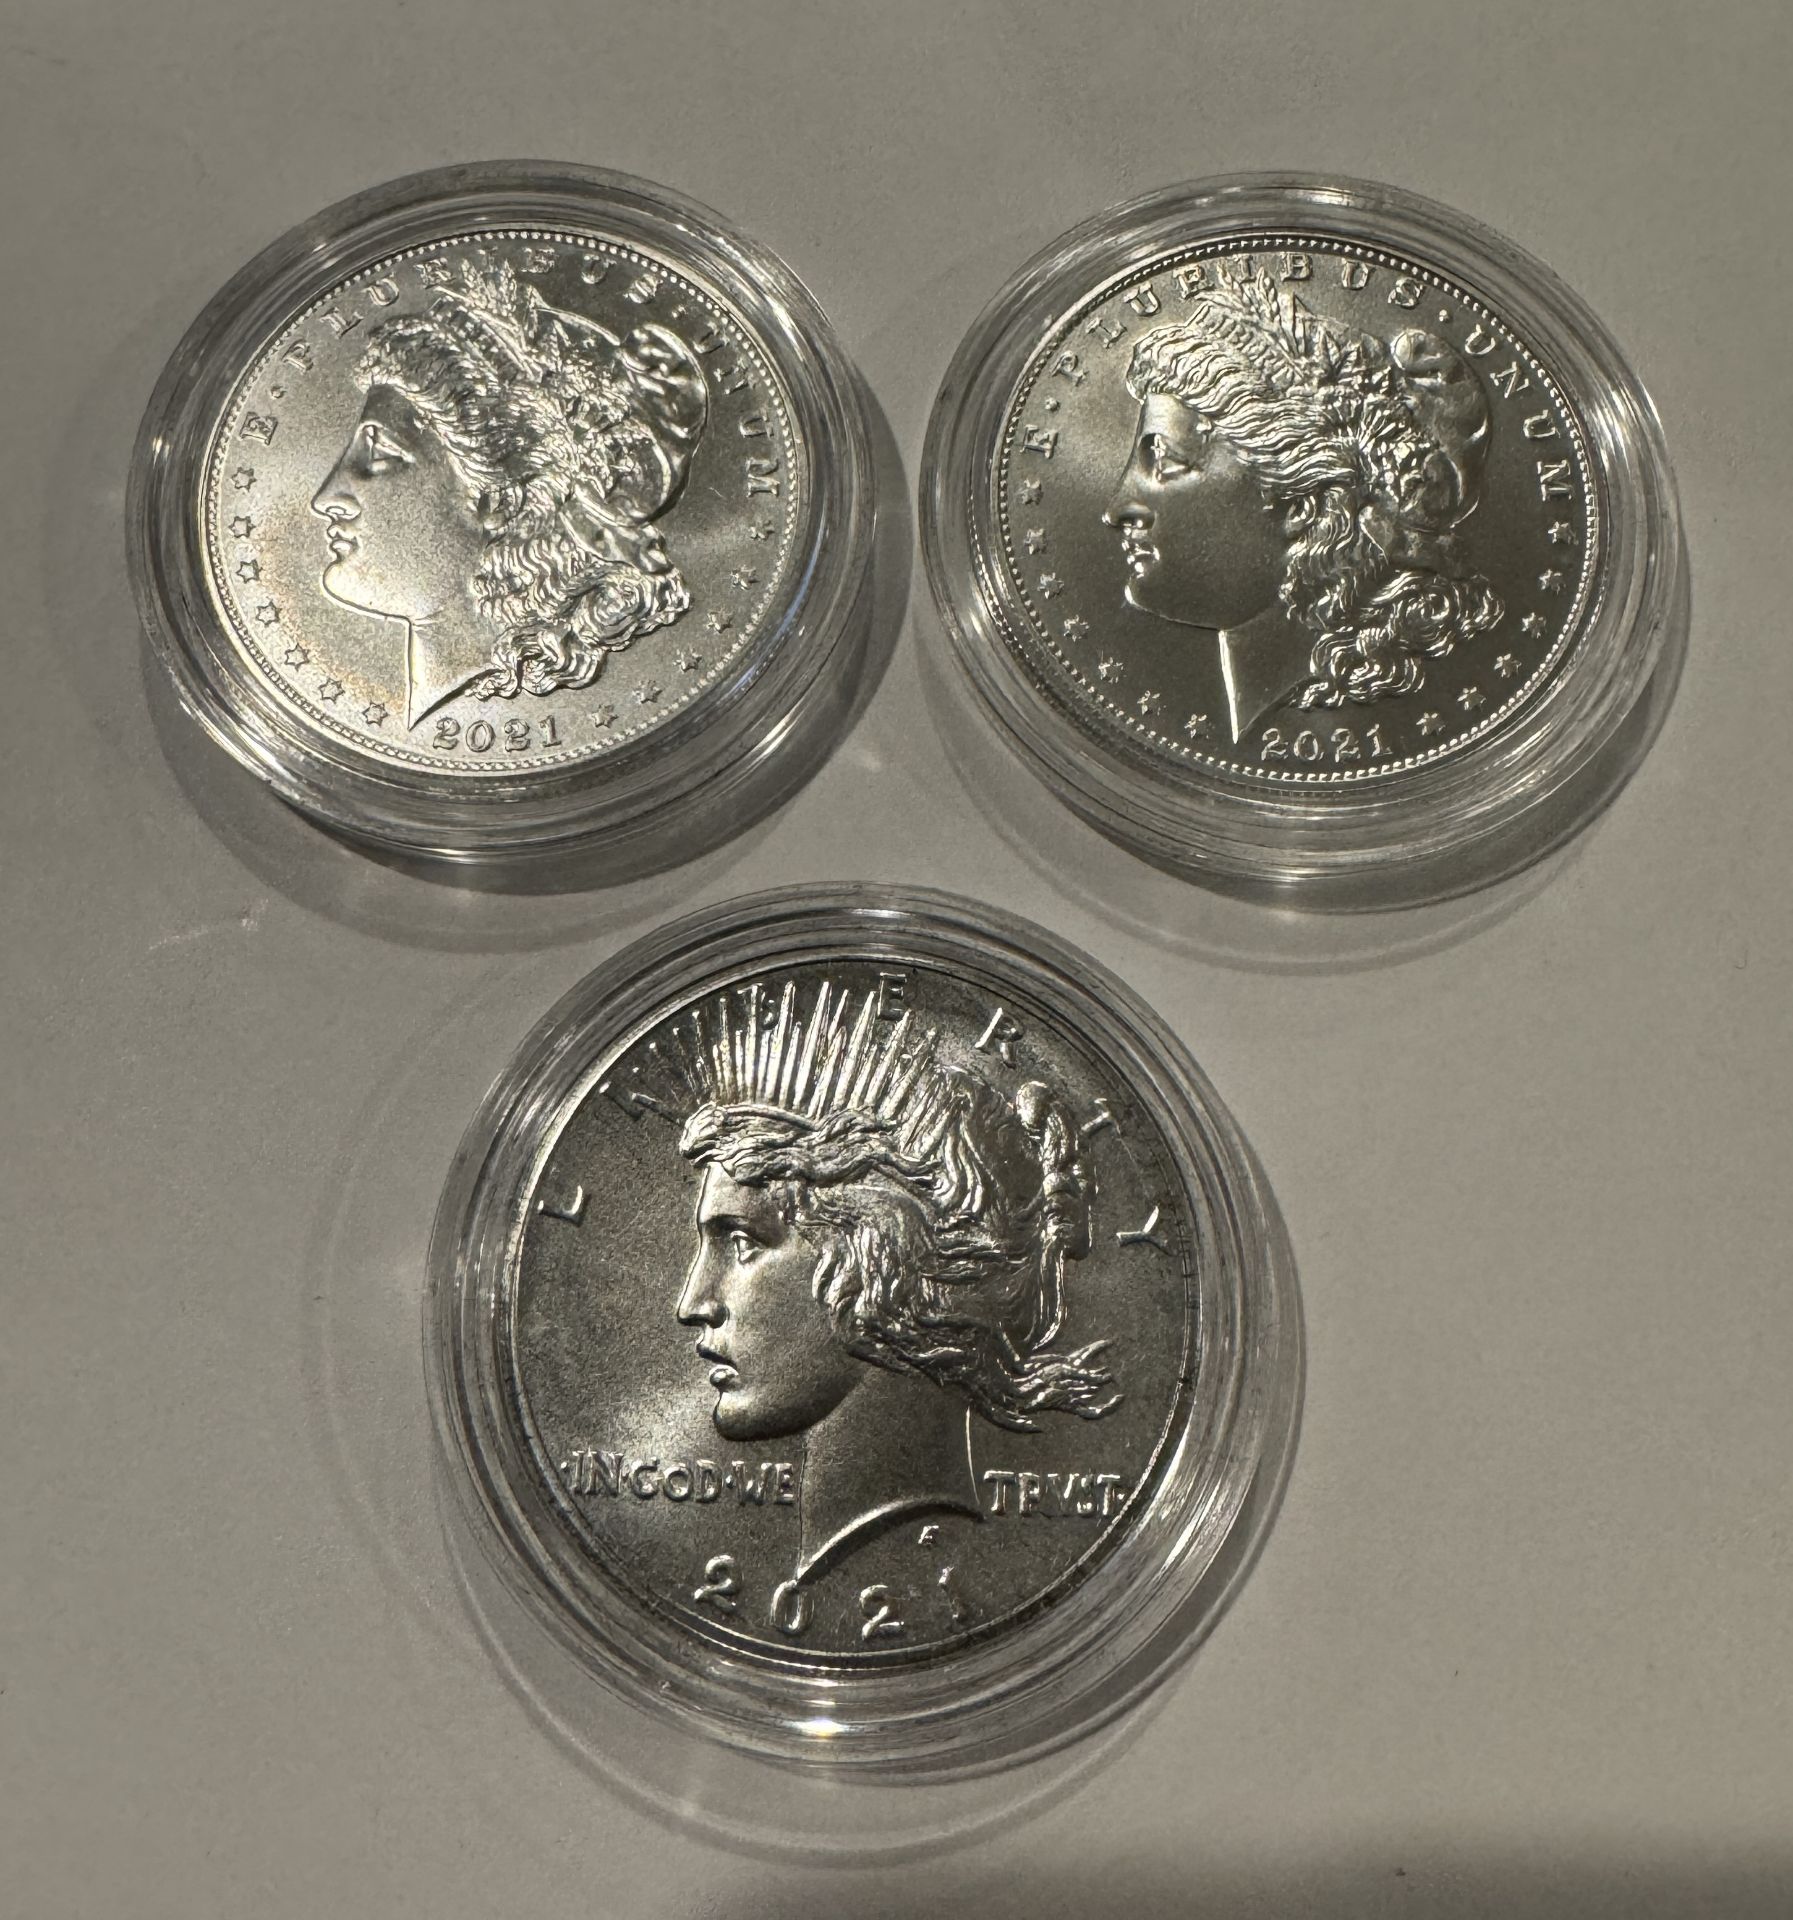 3 MODELS OF 2021 SILVER DOLLARS - Image 2 of 2